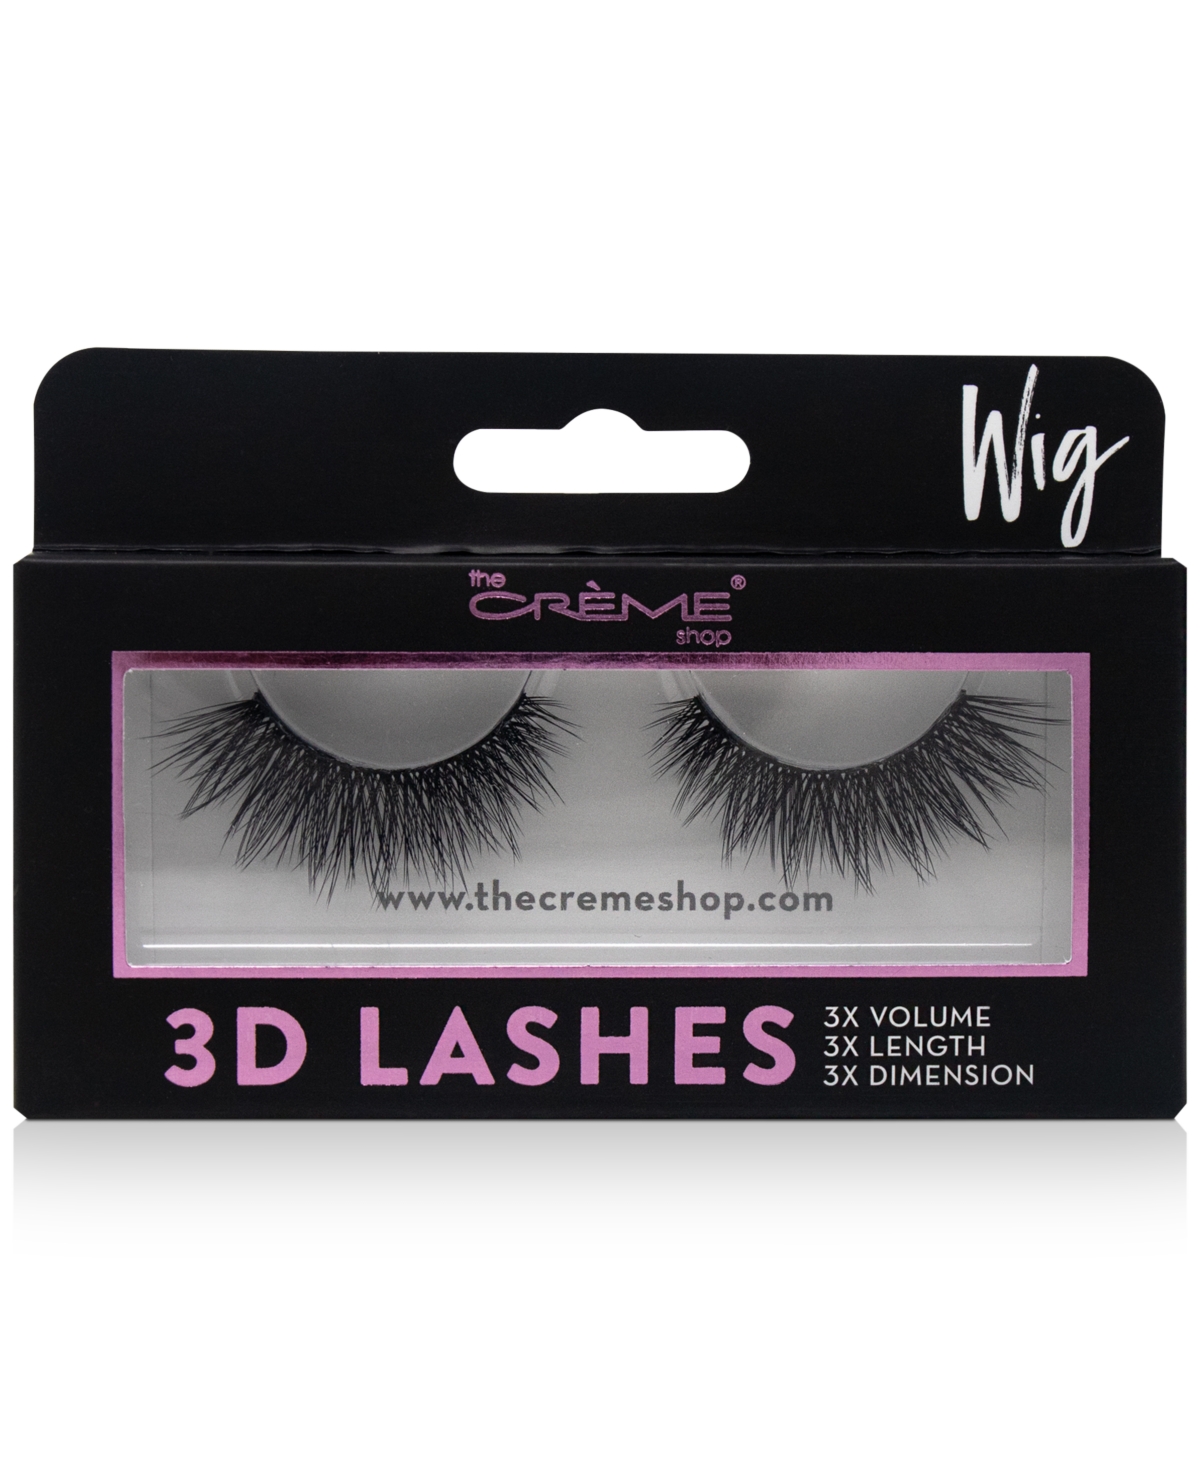 3D Lashes - Wig